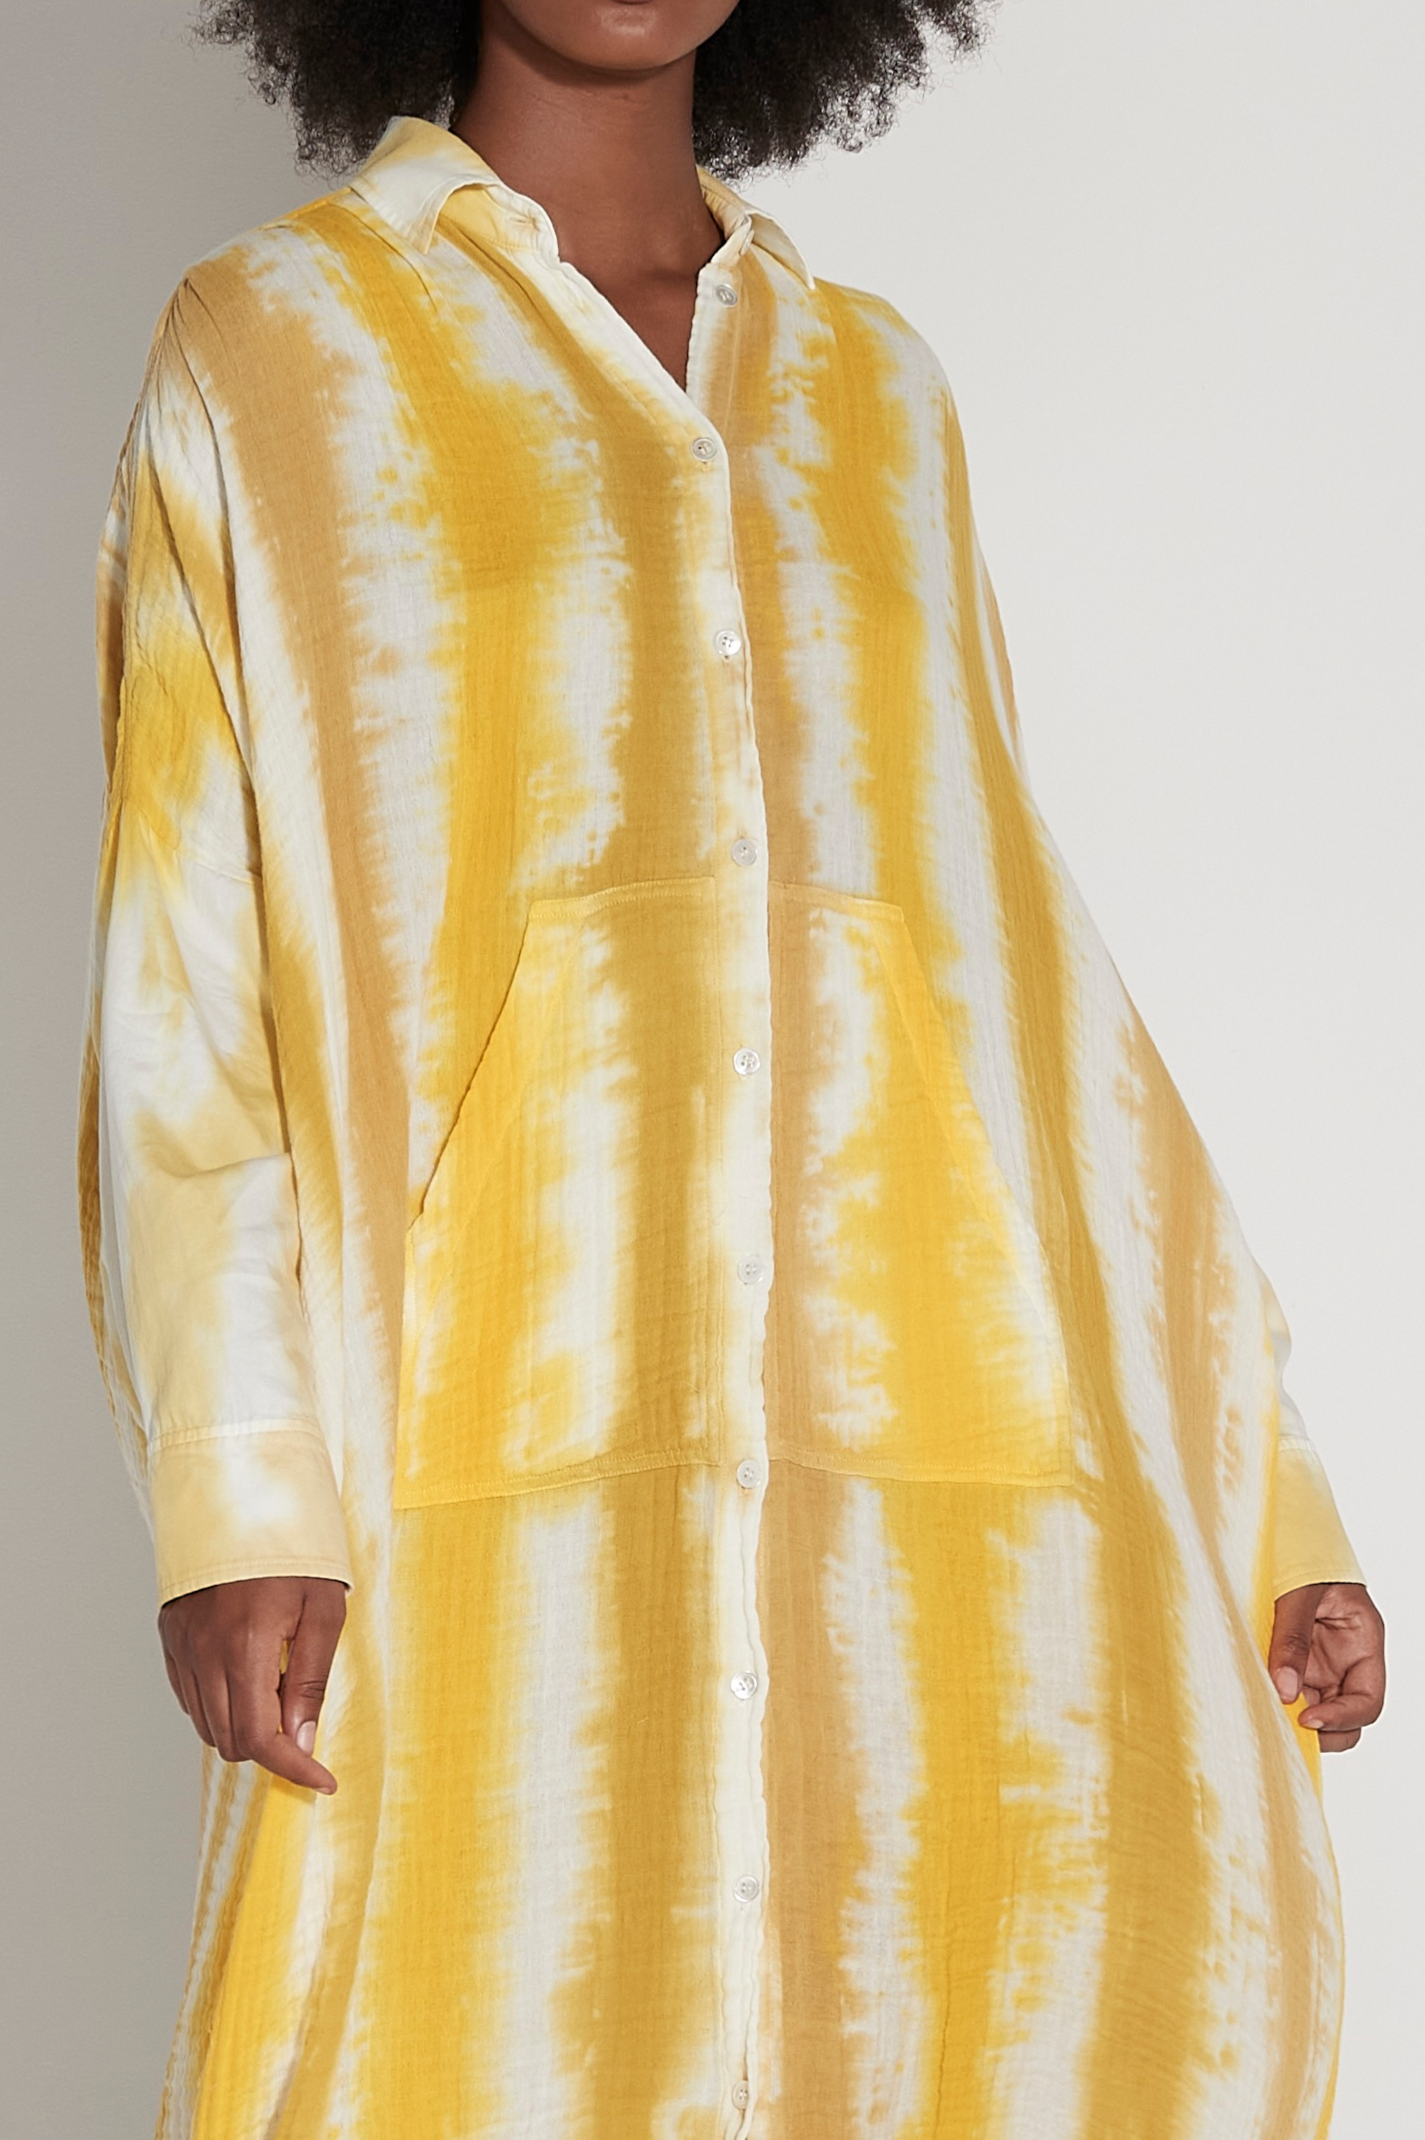 Yellow Stripes Caftan Shirt Front Close-Up View